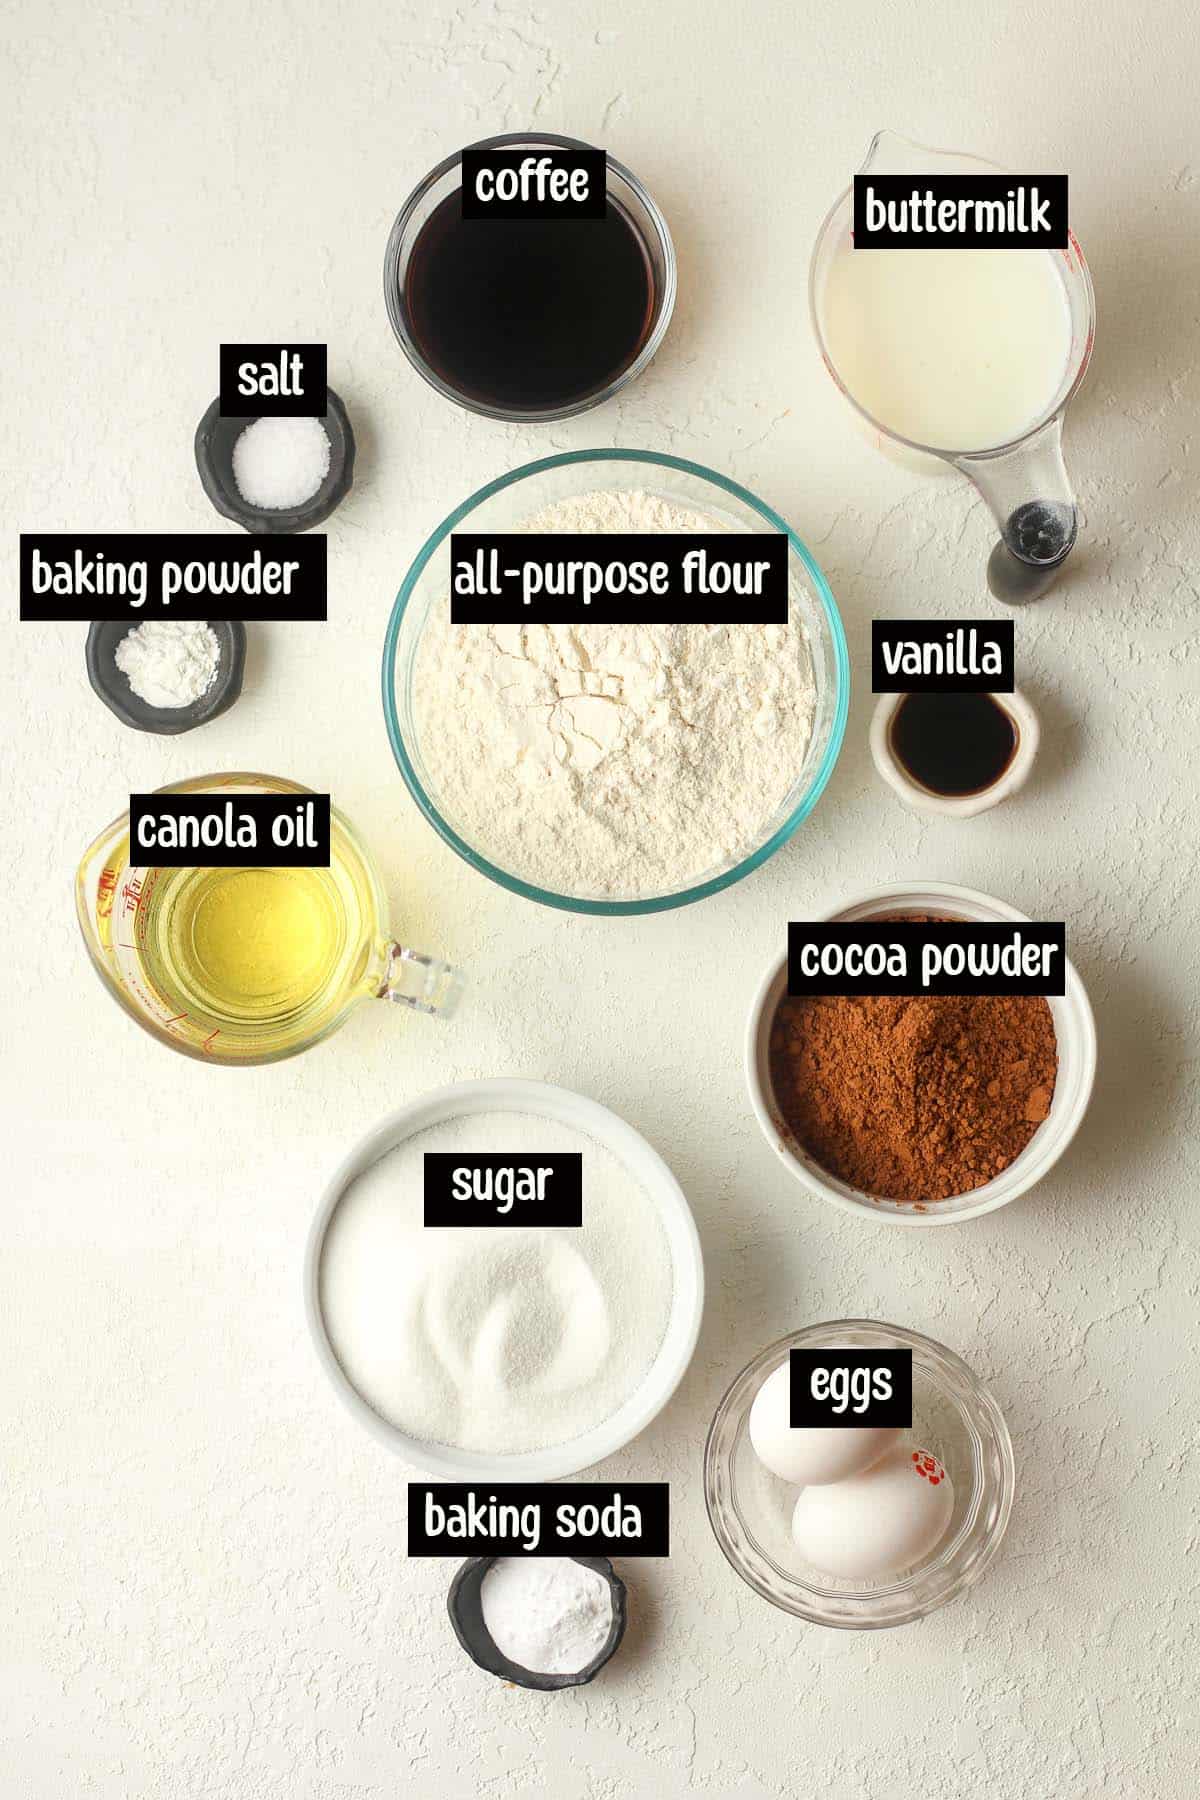 The cake ingredients in small bowls, labeled.